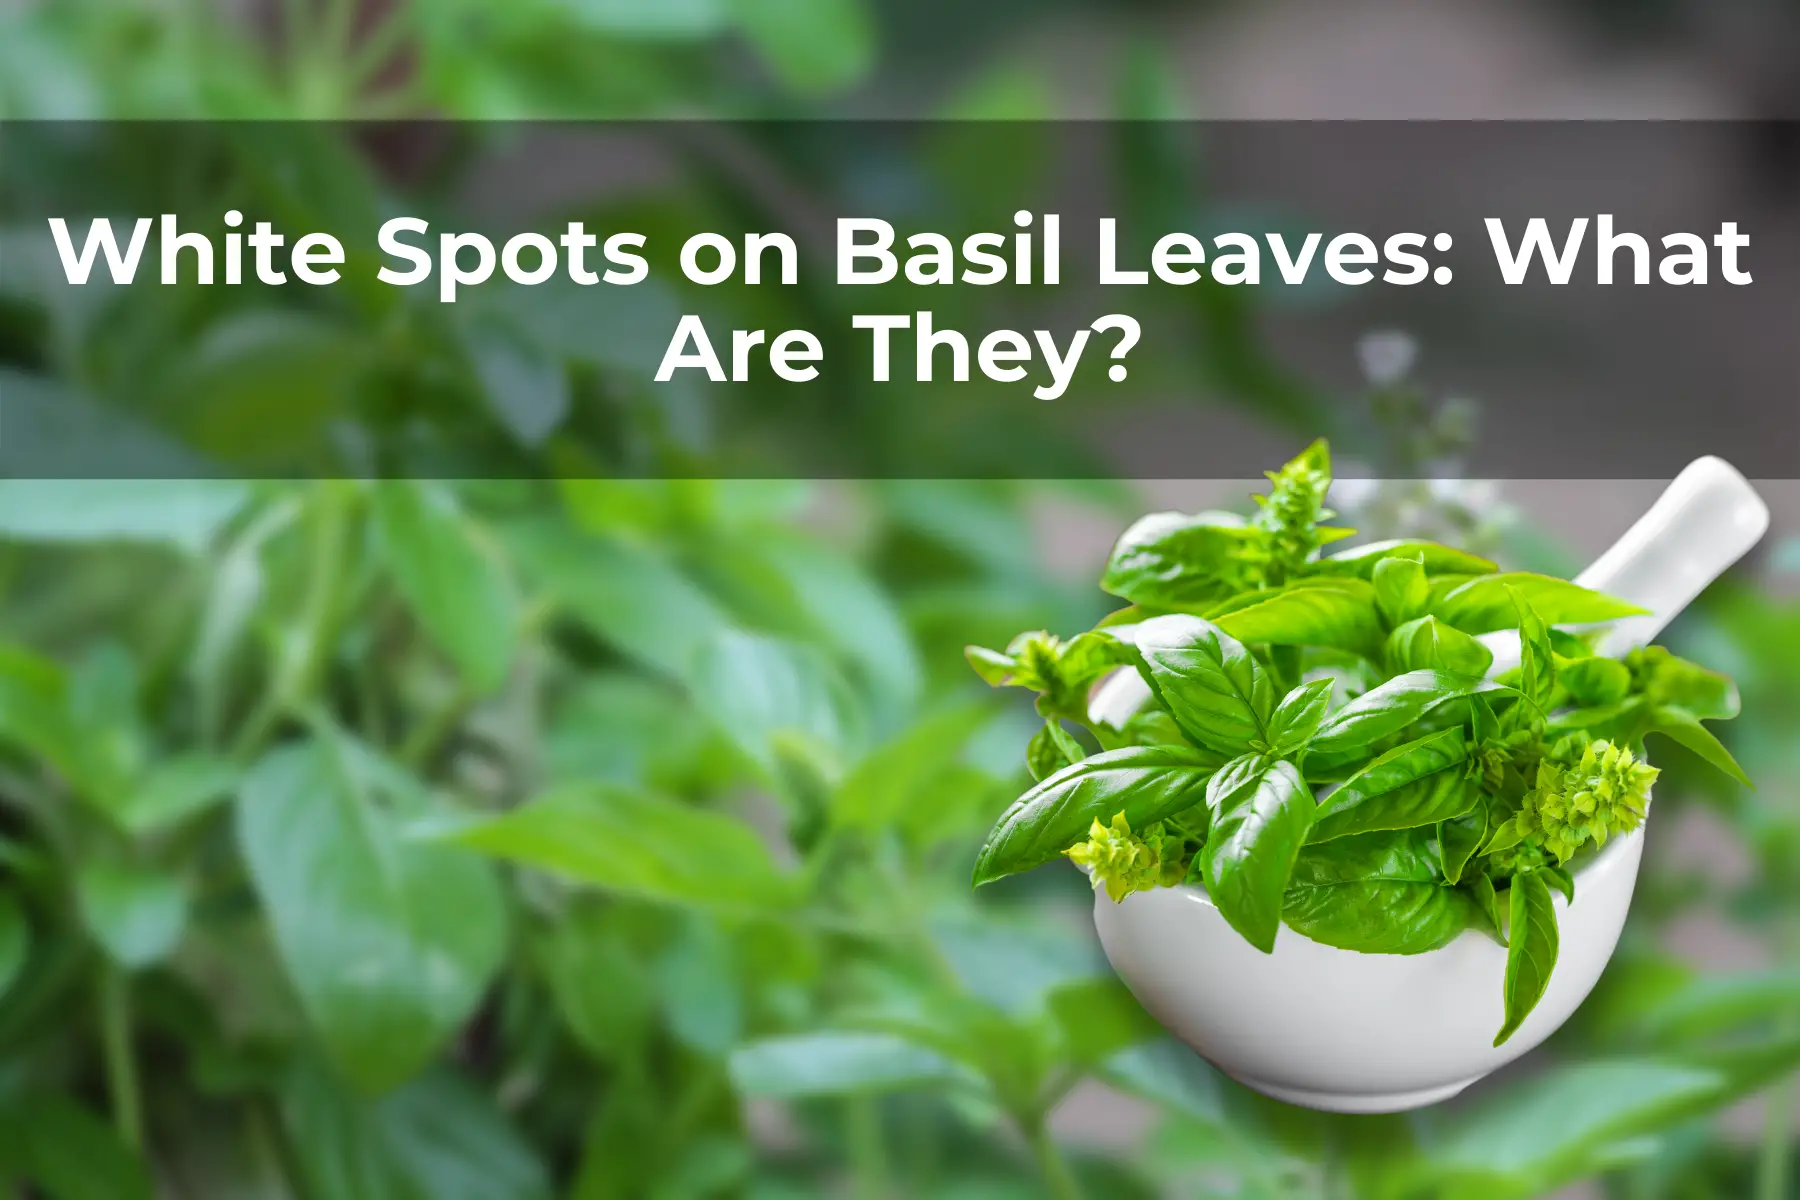 White Spots on Basil Leaves: What Are They?